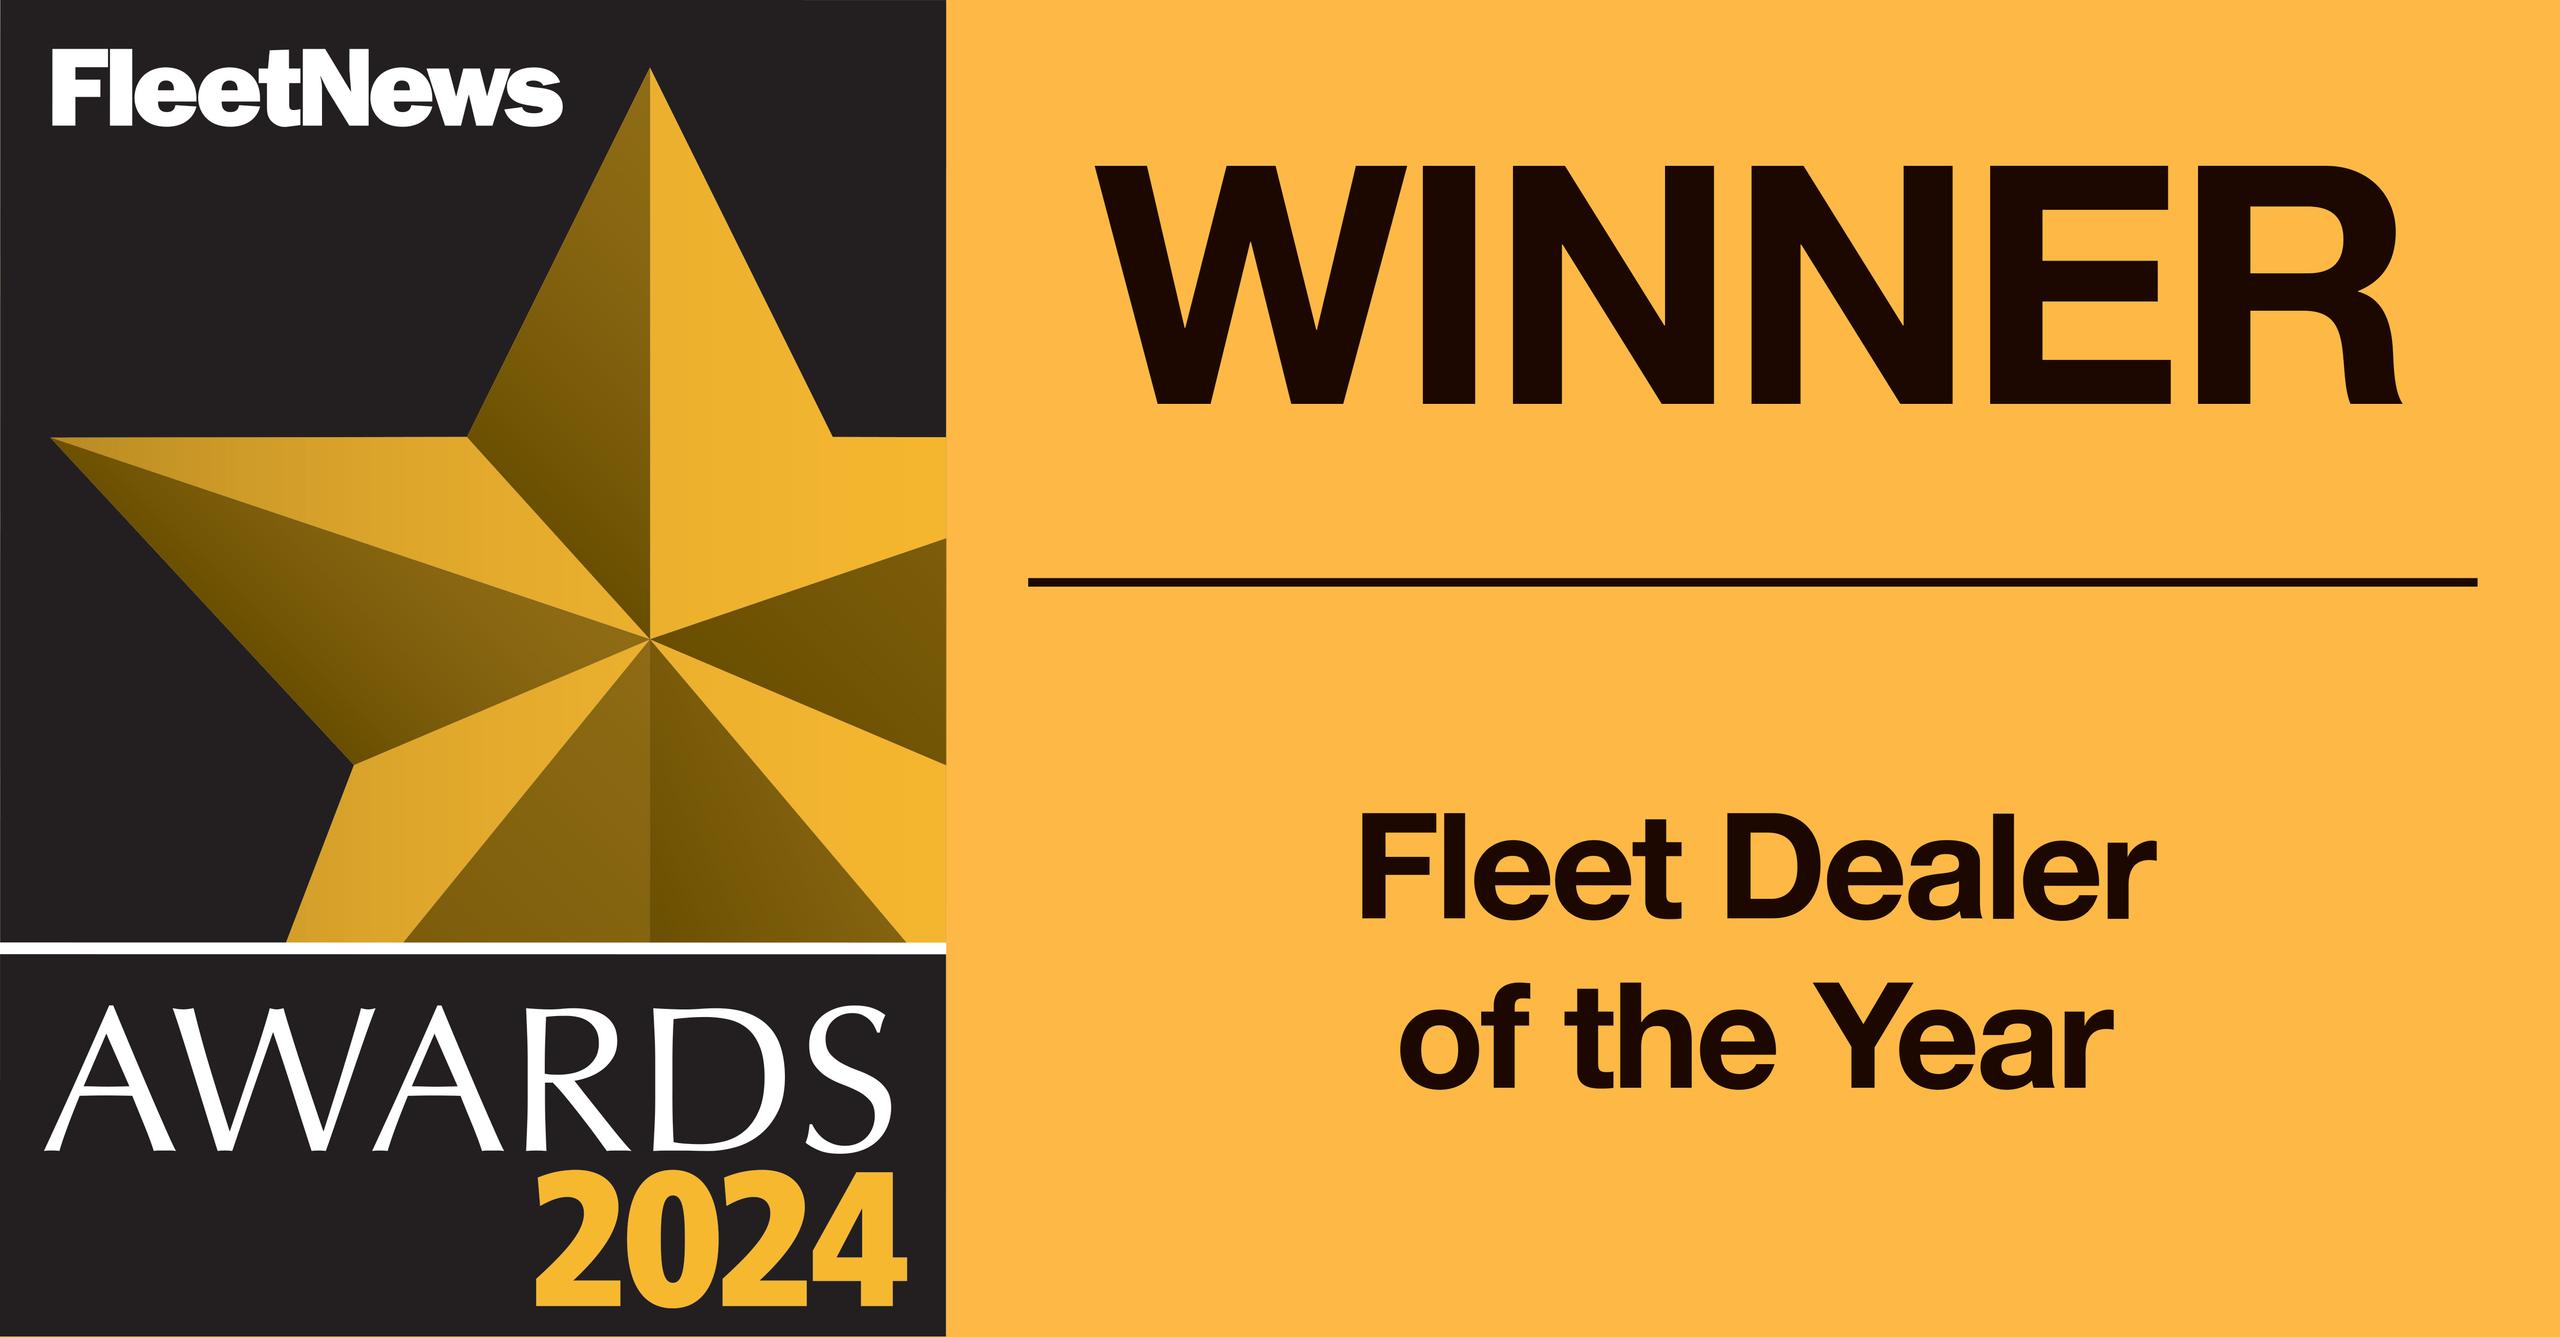 TrustFord Secures Fleet Dealer of the Year Award for the Fifth Time